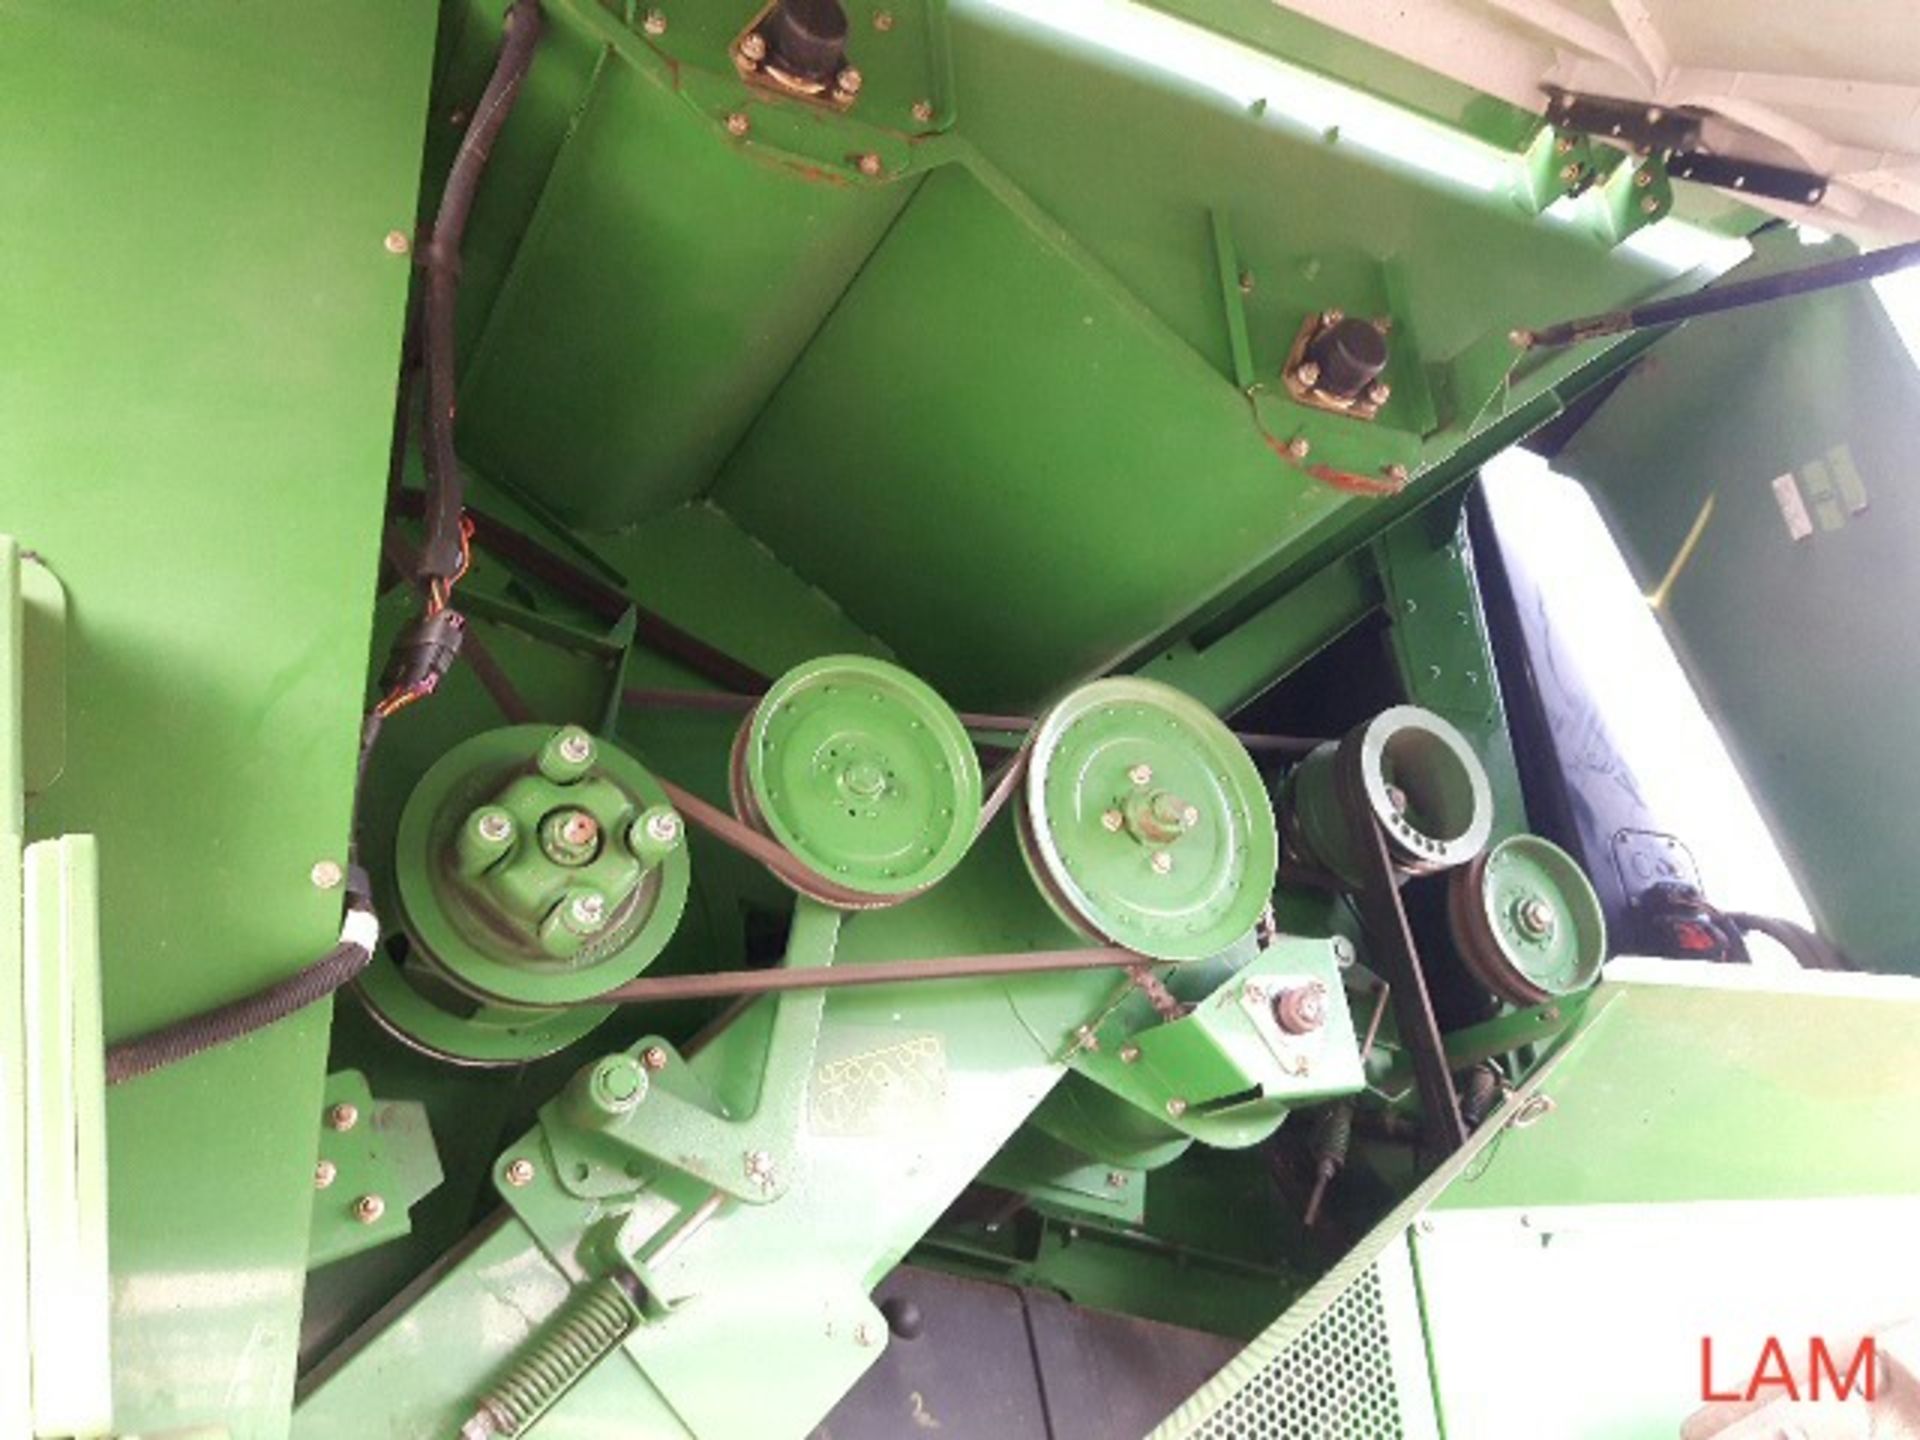 2002 9750 STS JD Combine sn H09750S696343 3889 eng hrs, 2801 thres hrs, Good Rubber!, 20.8/38 Dual - Image 13 of 31